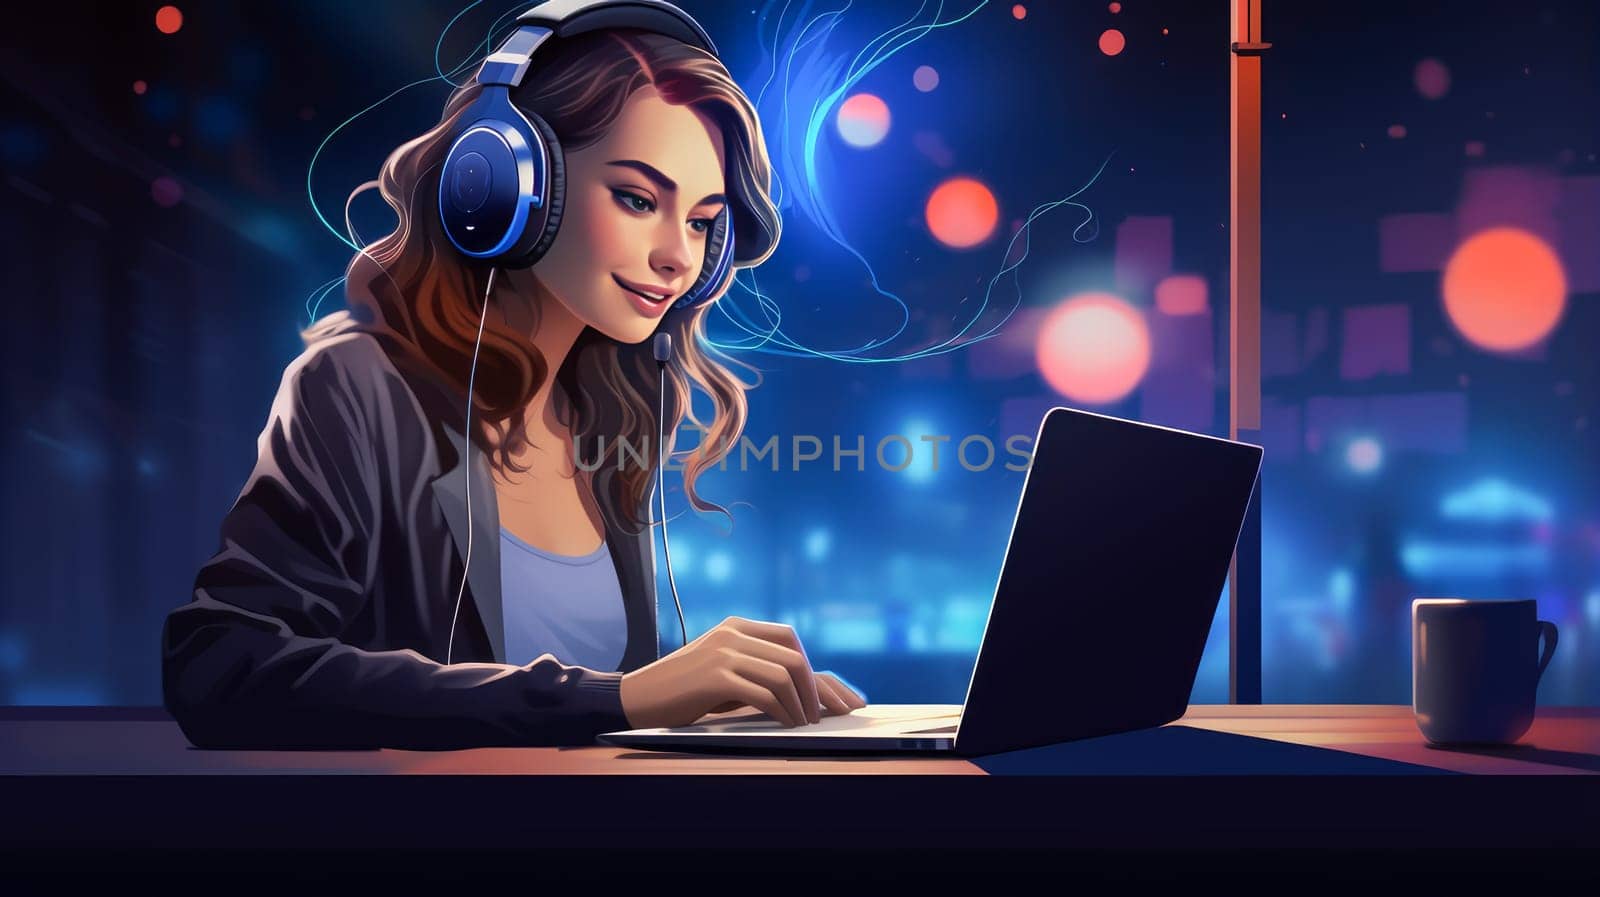 Portrait of a young modern DJ girl wearing headphones and using a laptop against the backdrop of a night city and neon lights in a futuristic style. by Alla_Yurtayeva